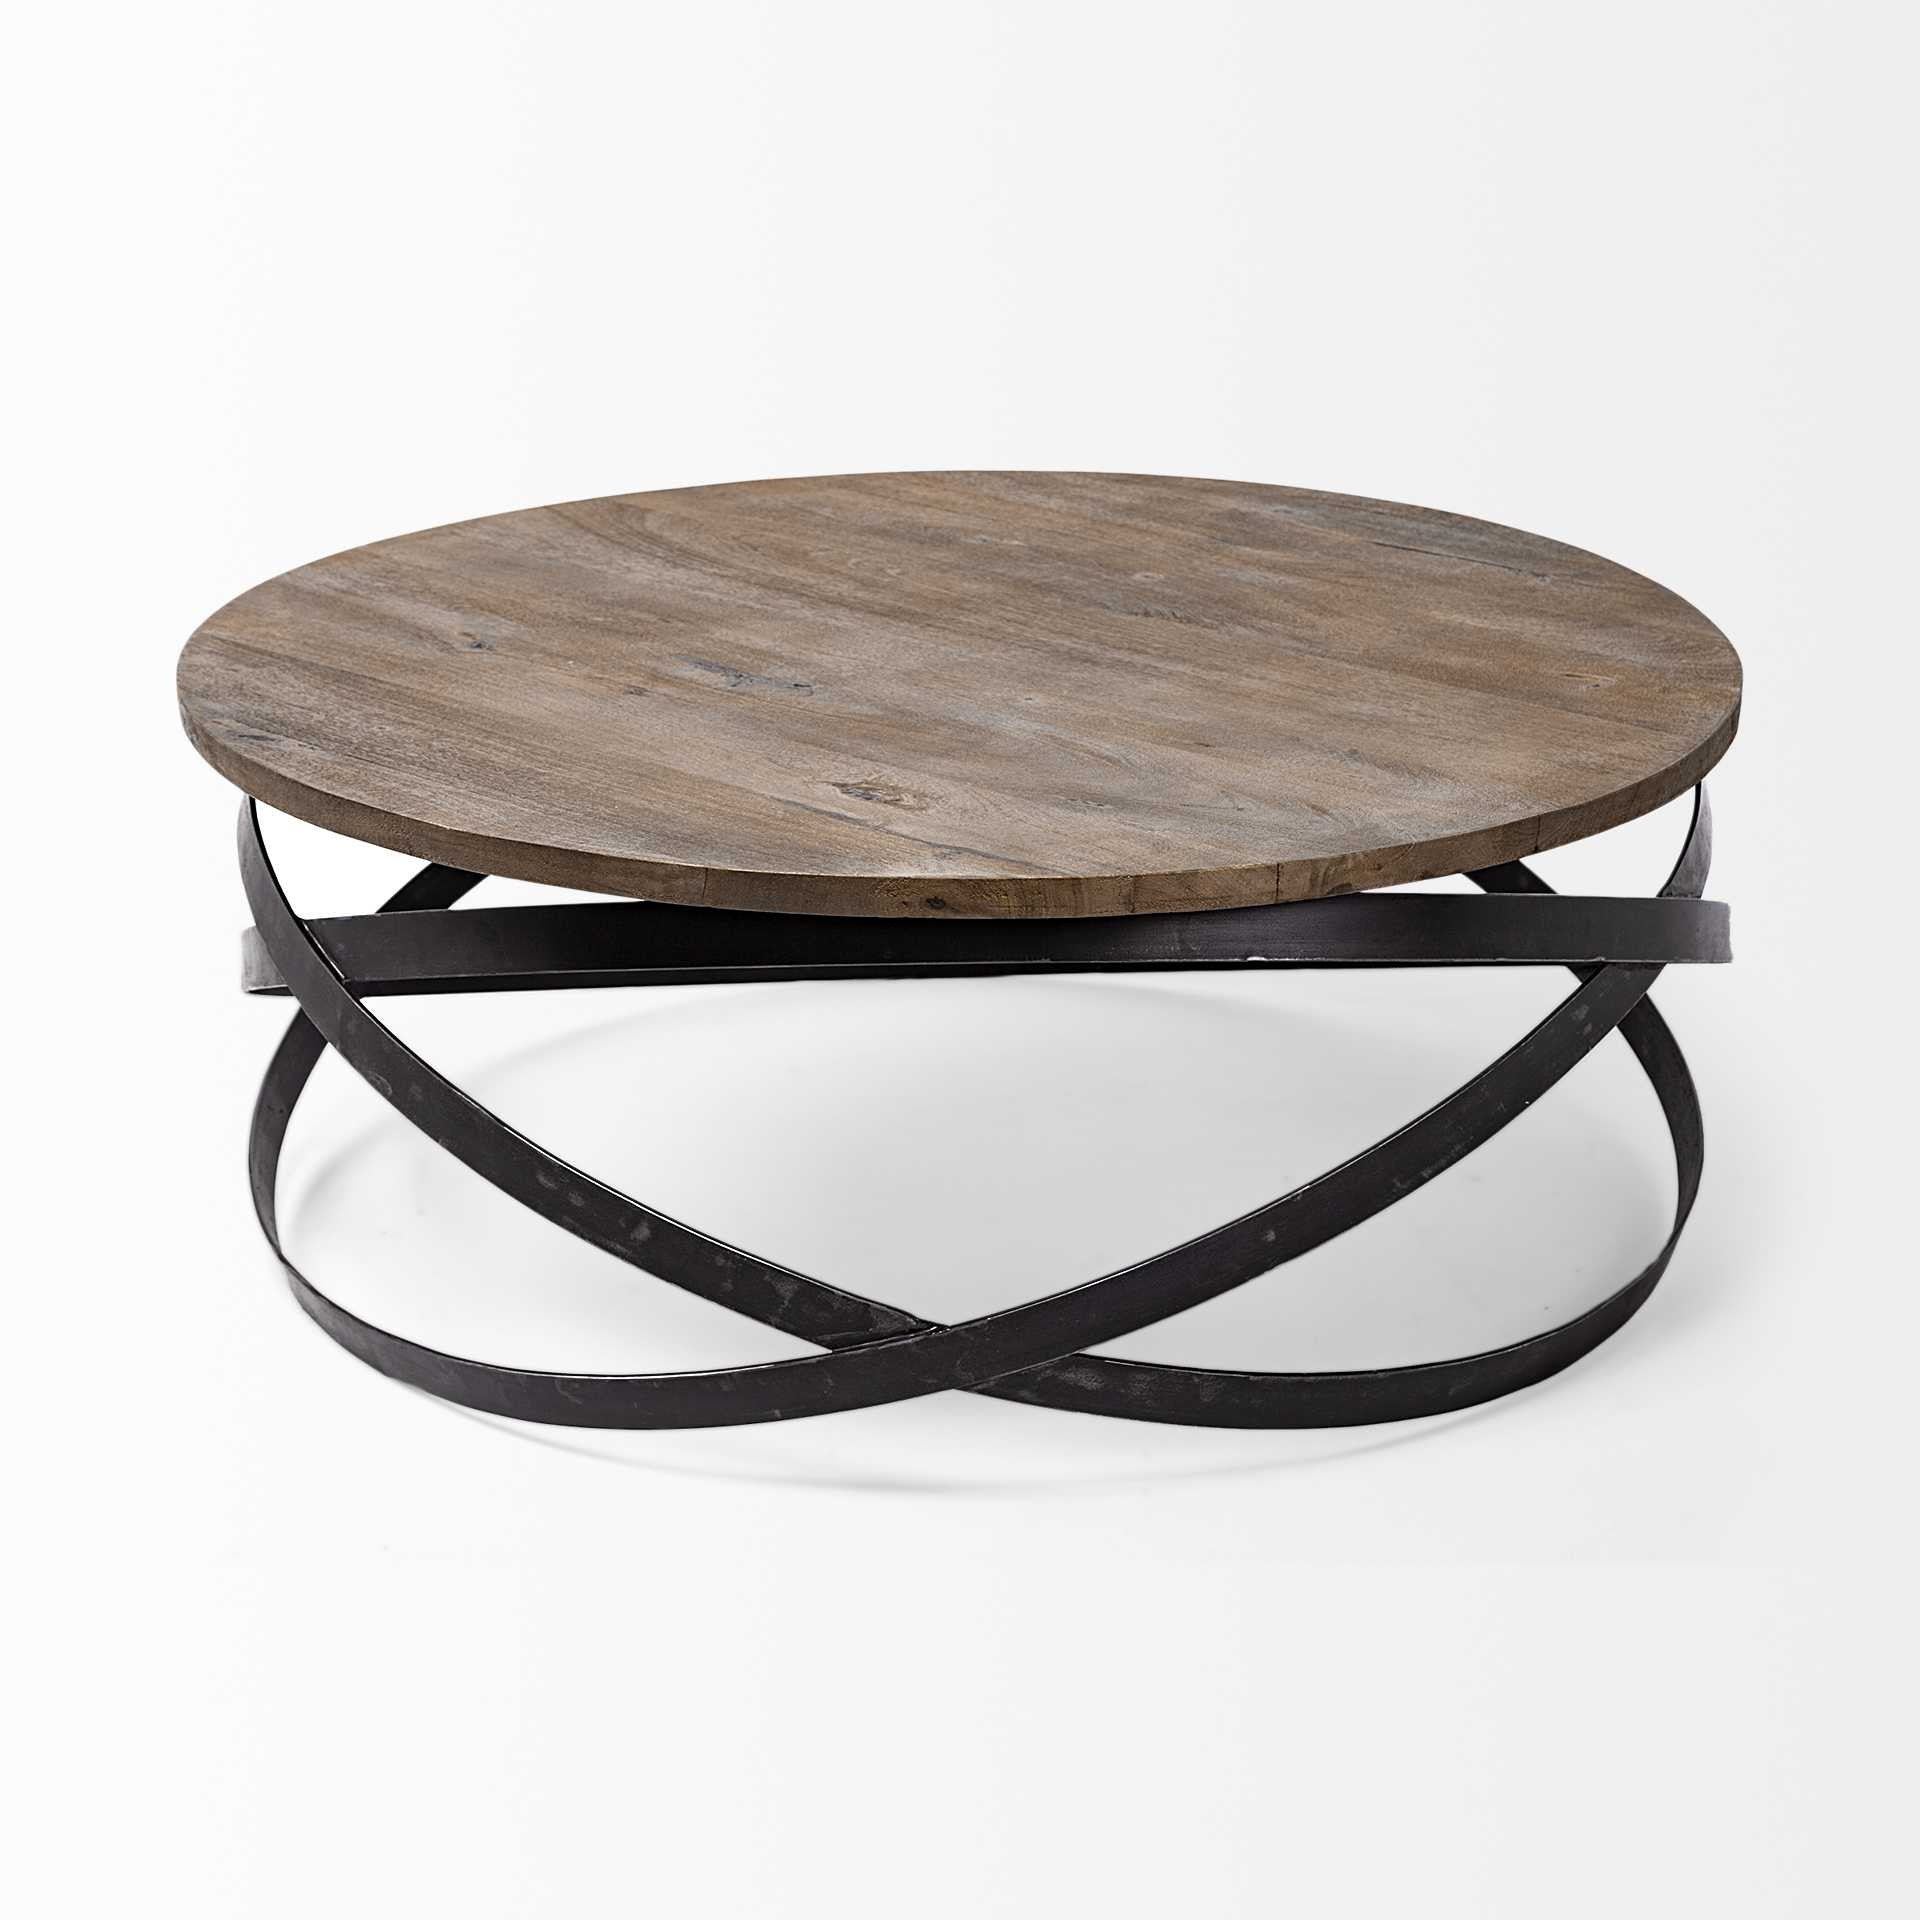 41" Brown And Black Solid Wood And Metal Round Coffee Table